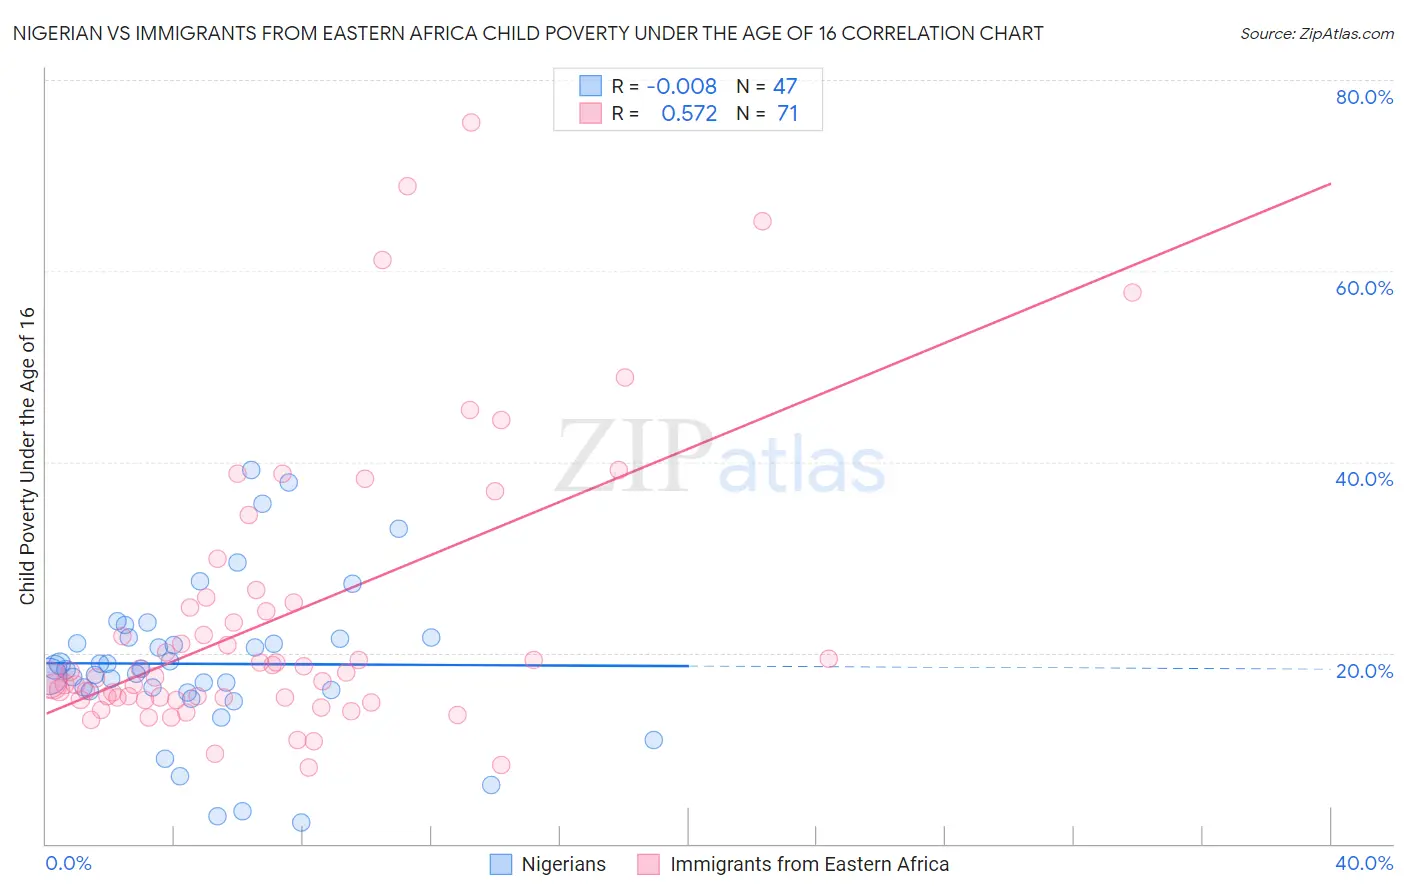 Nigerian vs Immigrants from Eastern Africa Child Poverty Under the Age of 16